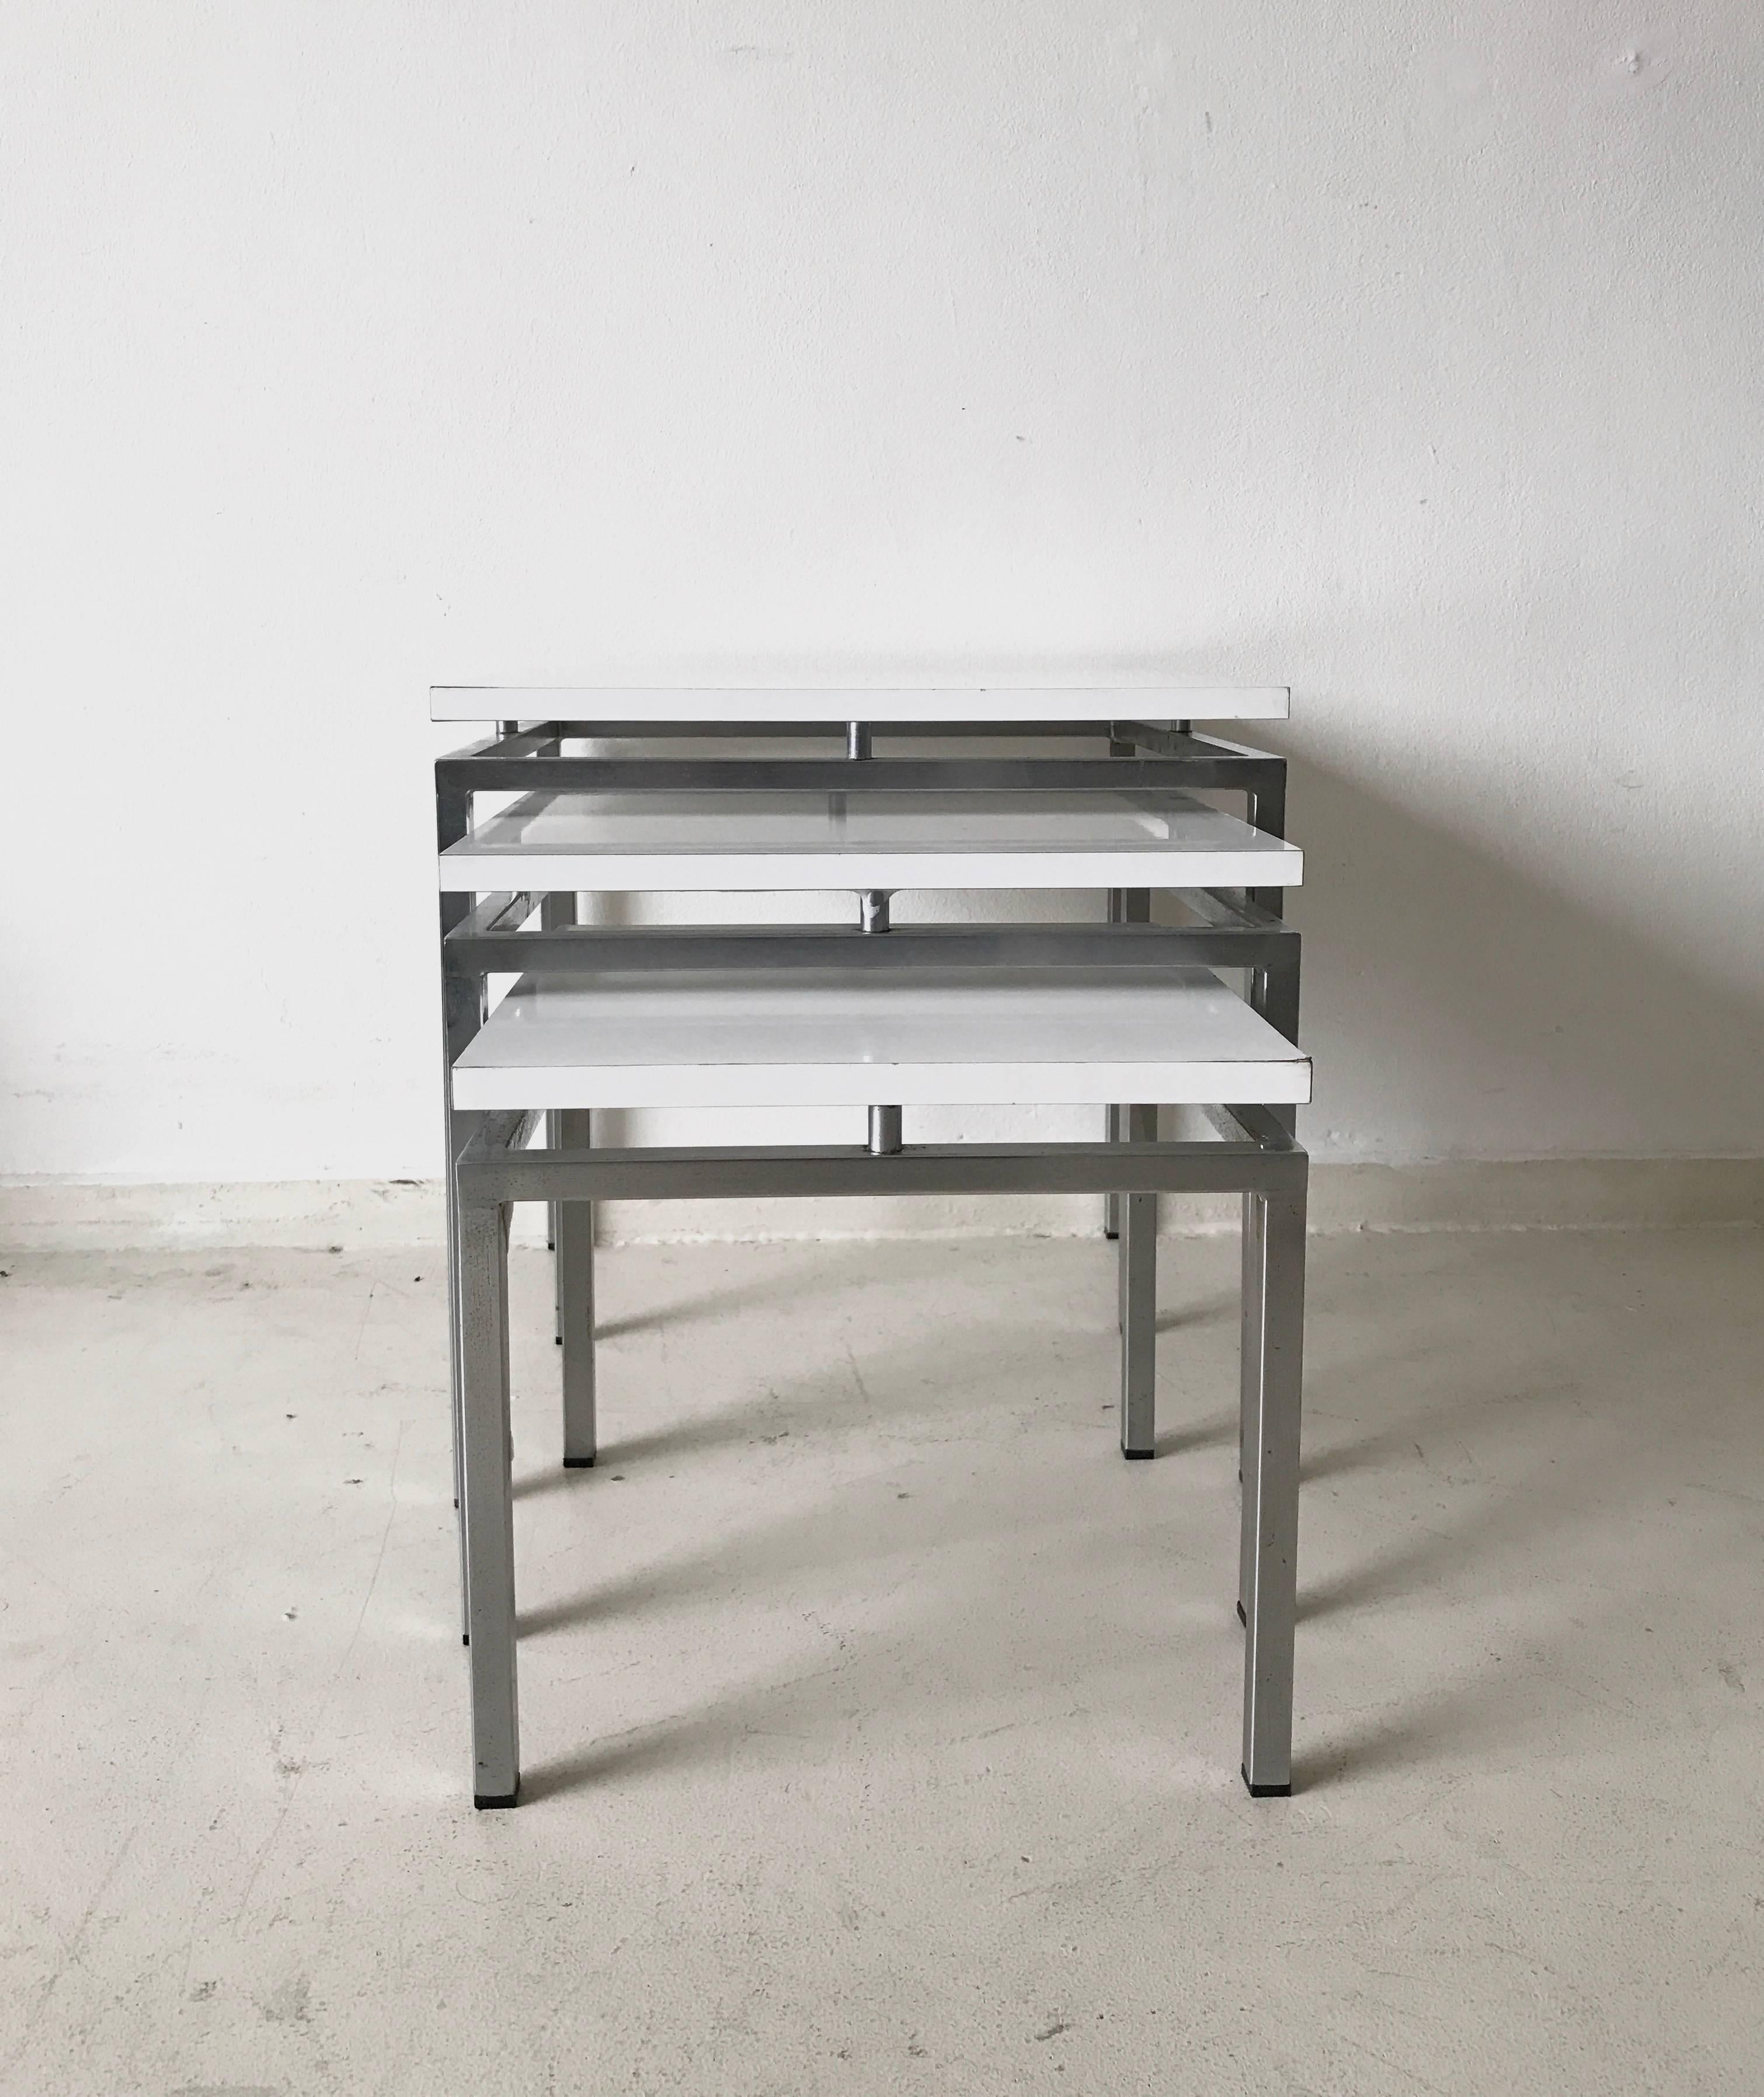 Set of three nesting tables designed by Stiemsma during the 1960s. They come with a metal base and white tops attached to it. The set remains in a good vintage condition with small signs of age and use.